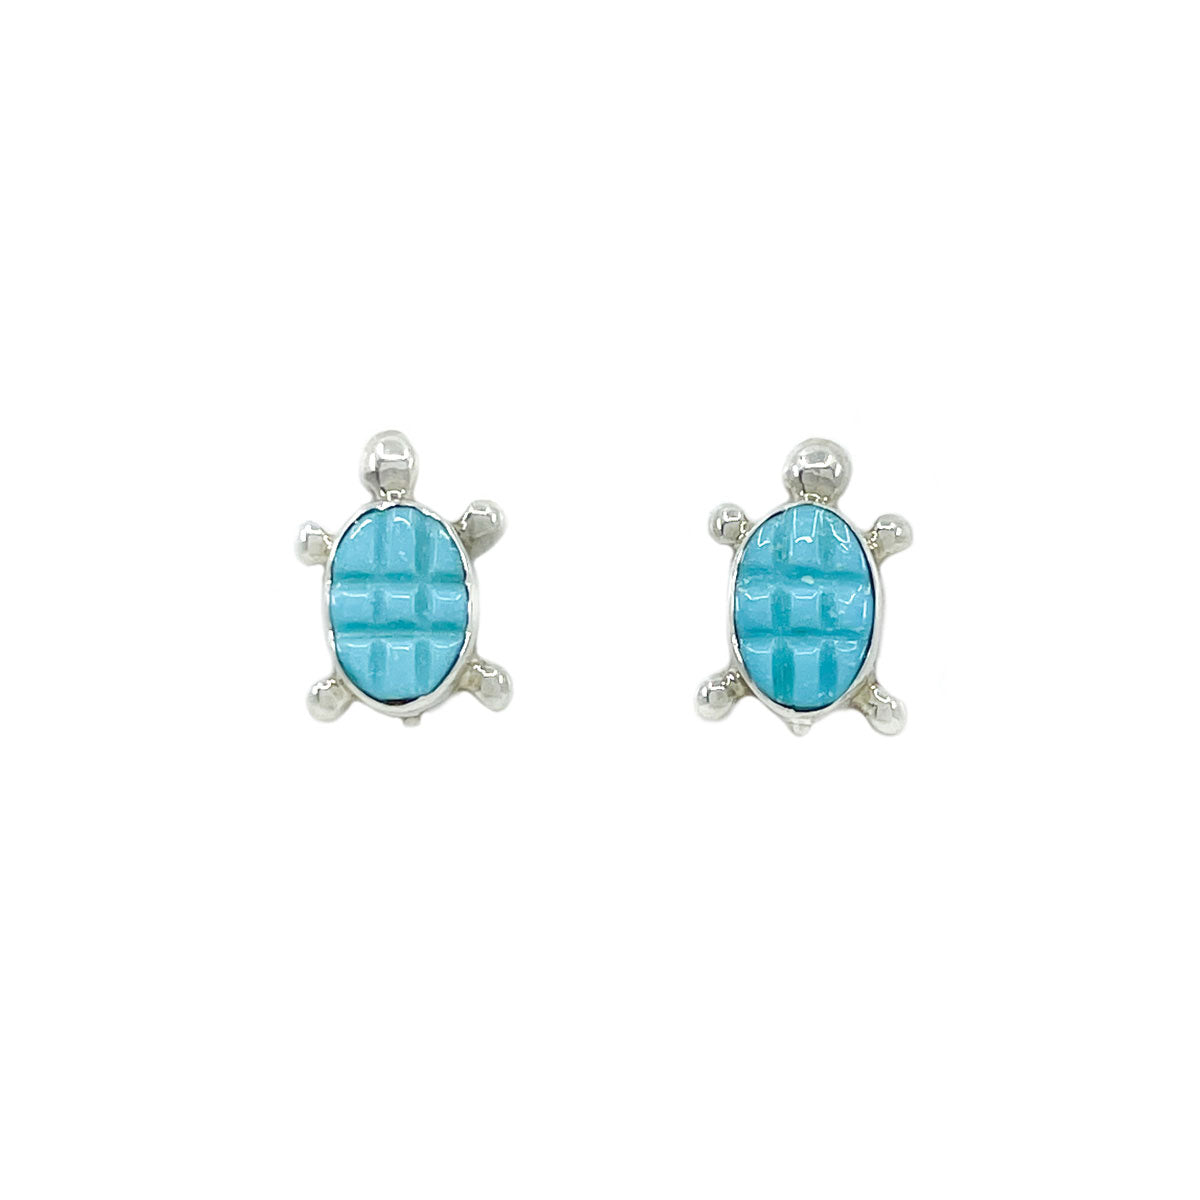 Load image into Gallery viewer, Small carved Sleeping Beauty Mine turquoise turtle stud earrings in sterling silver setting By Falena and Verona Malie Measures approx. 3/8 of and inch wide by .50 inches long 
